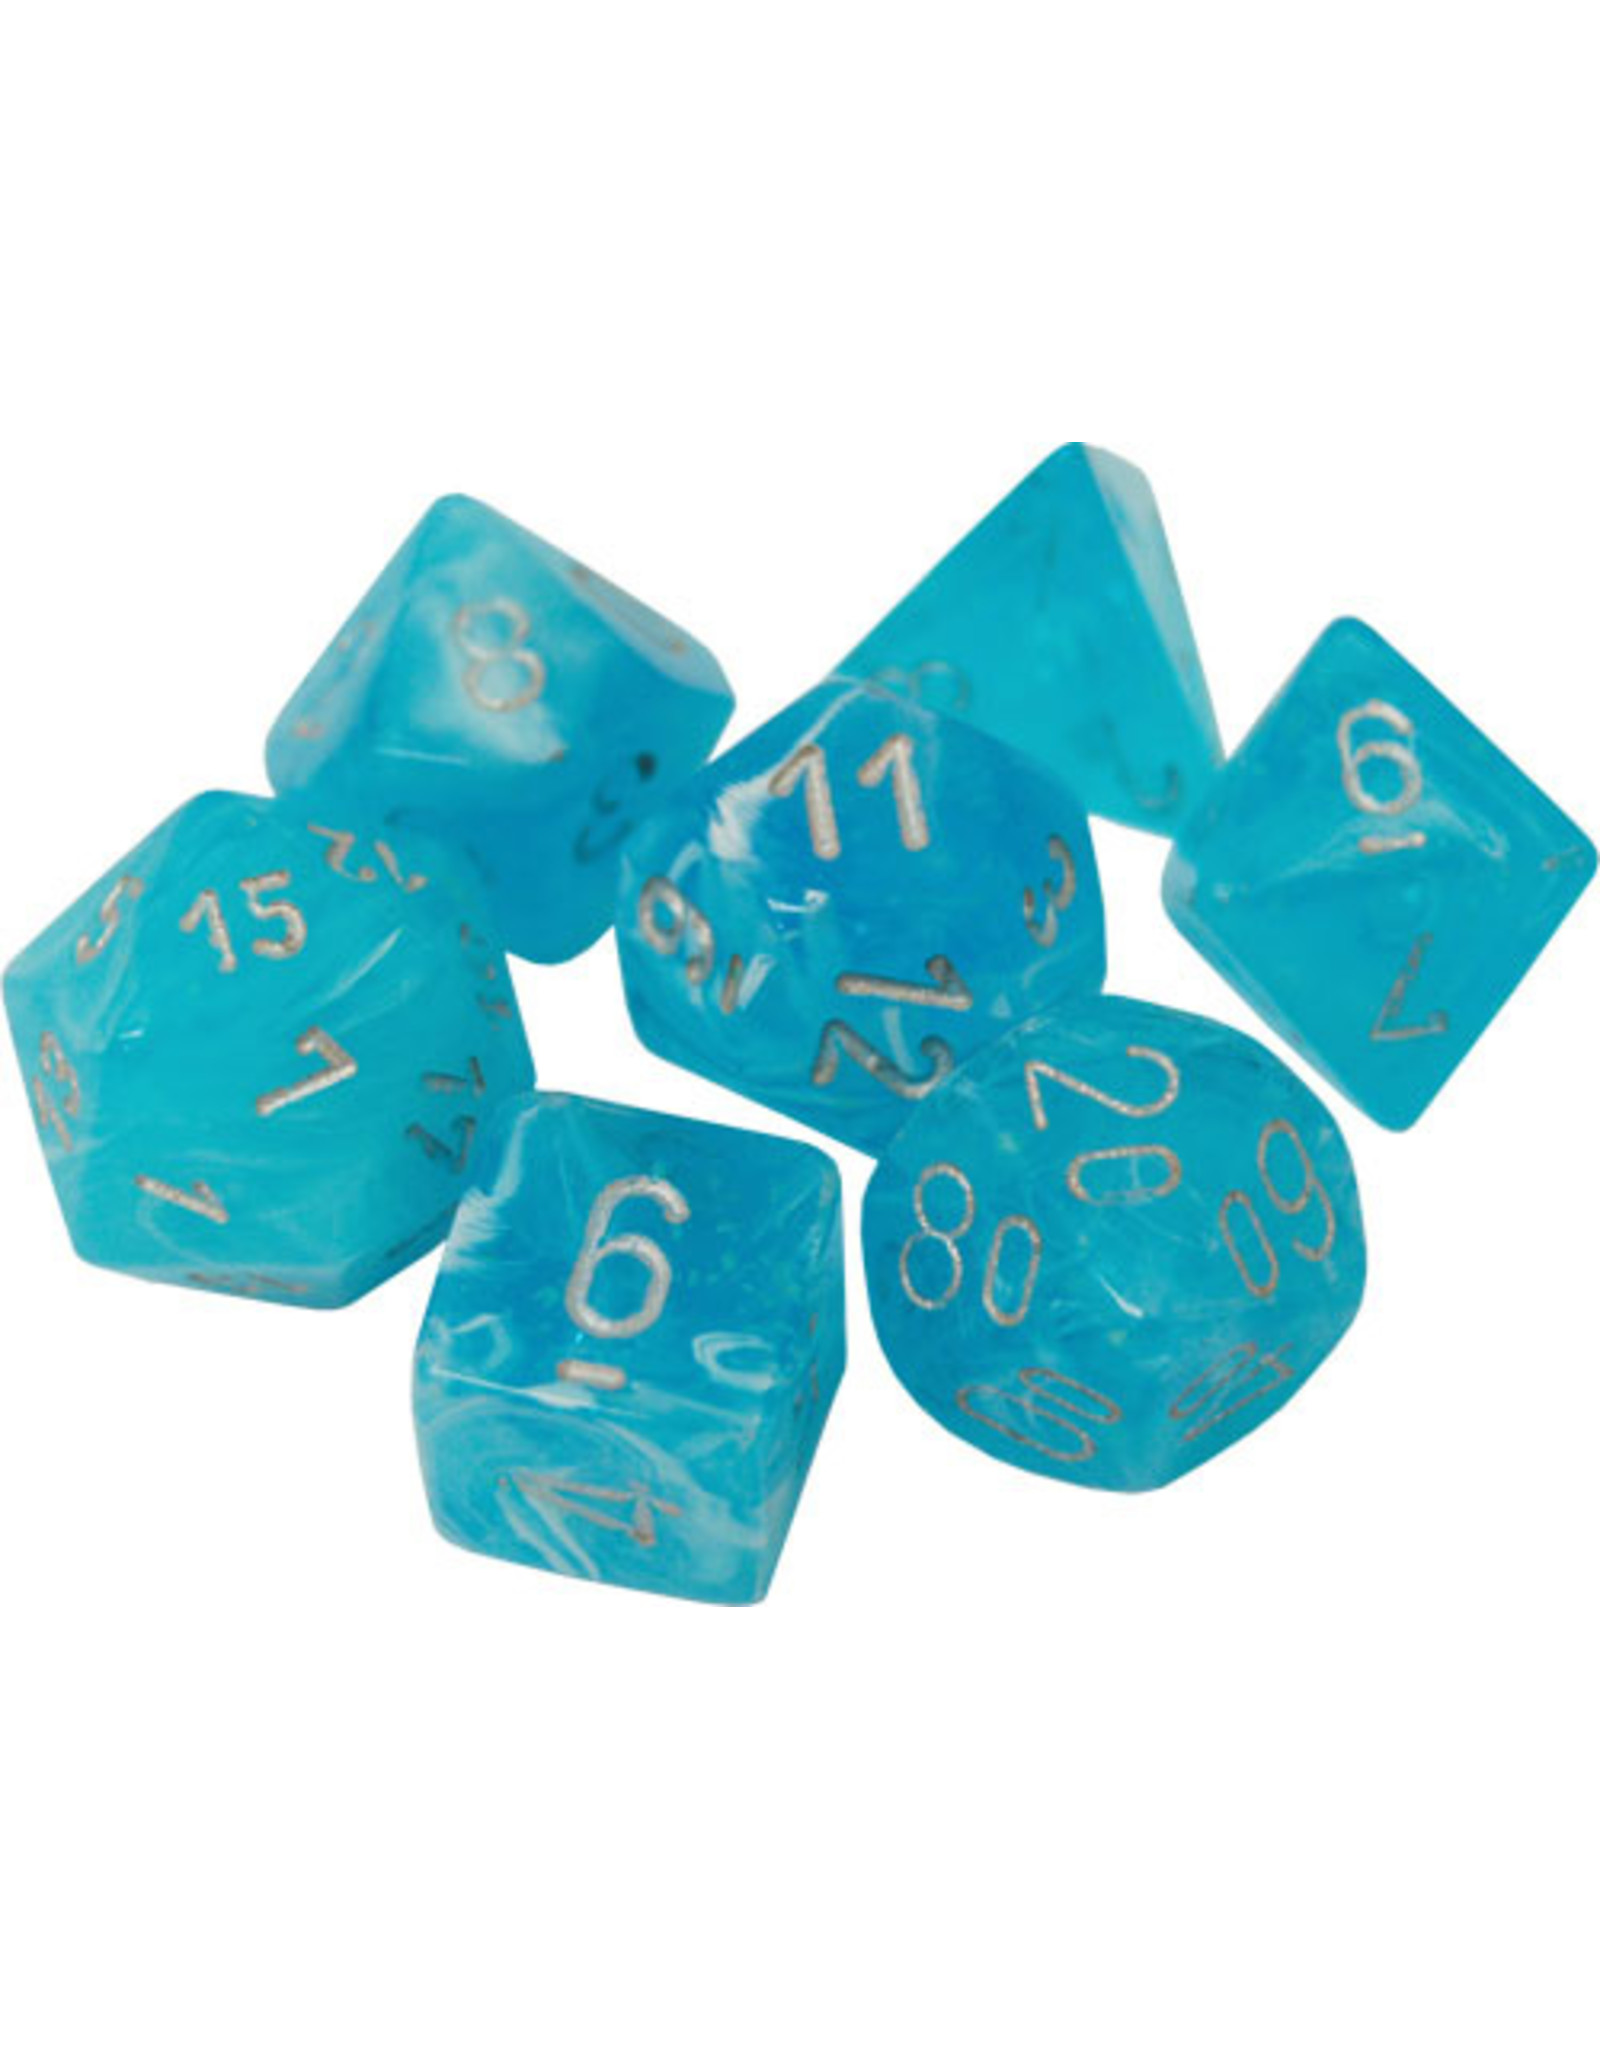 Chessex 7-Set Cube Luminary Sky with Silver